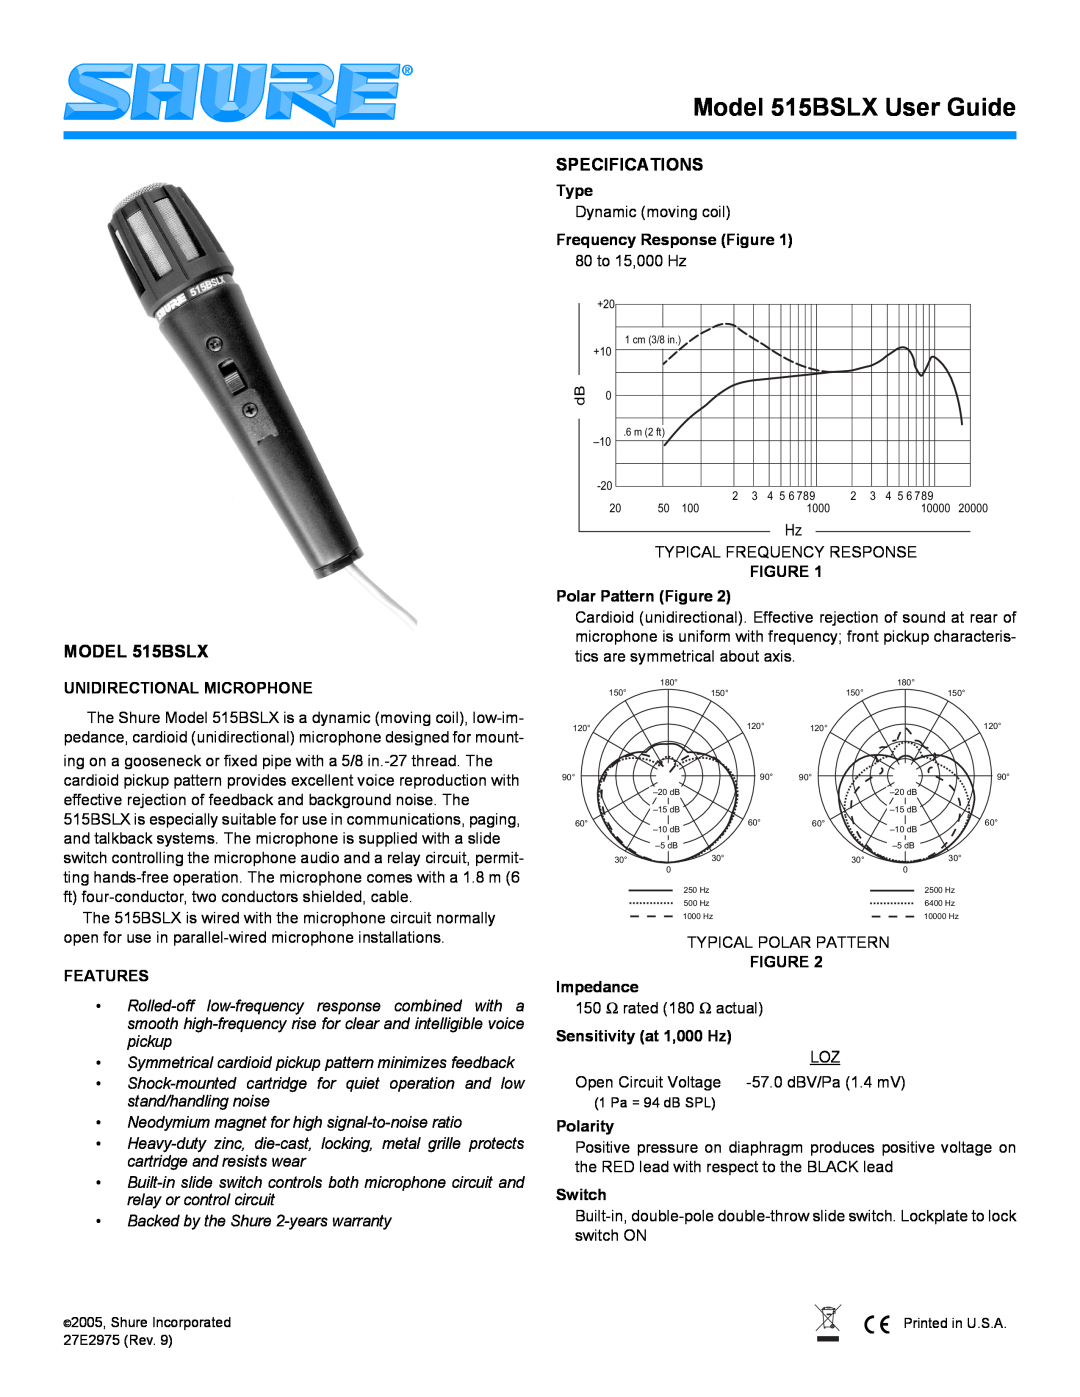 Shure specifications MODEL 515BSLX, Specifications, Unidirectional Microphone, Features, Type, Polar Pattern Figure 